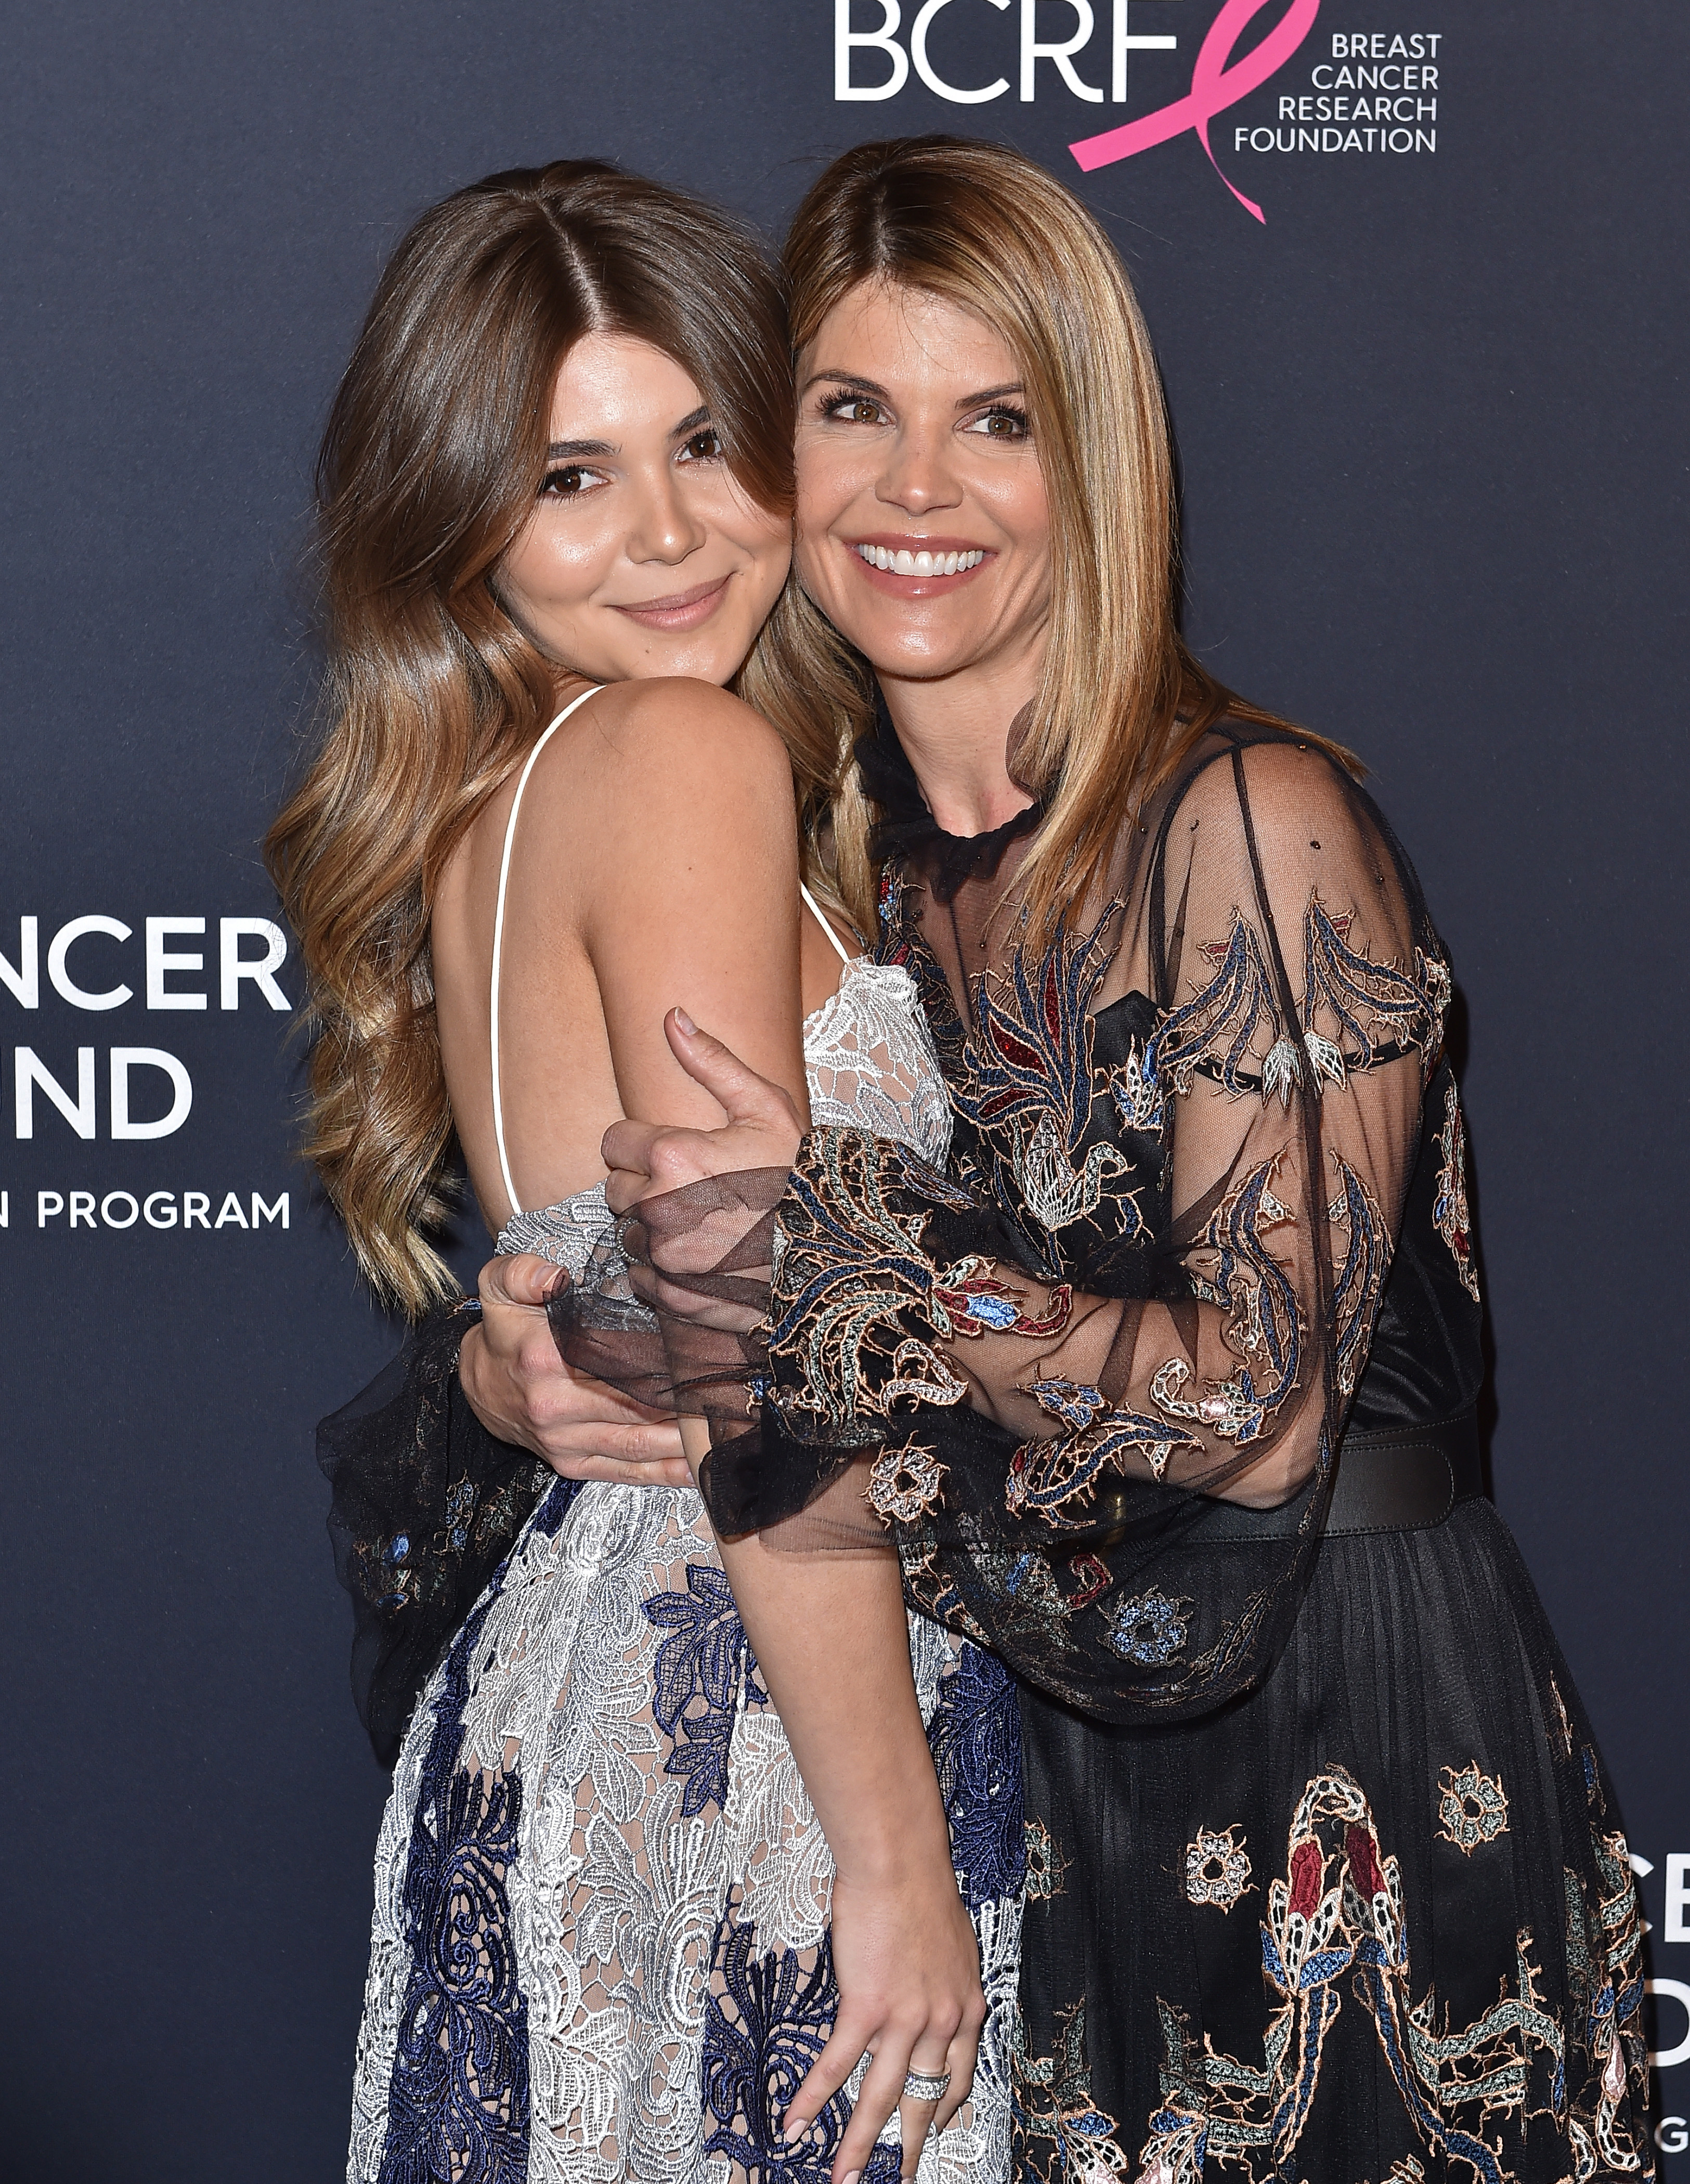 Lori Loughlin and daughter Olivia Jade Giannulli attend a gala on February 27, 2018 in Beverly Hills, California | Source: Getty Images